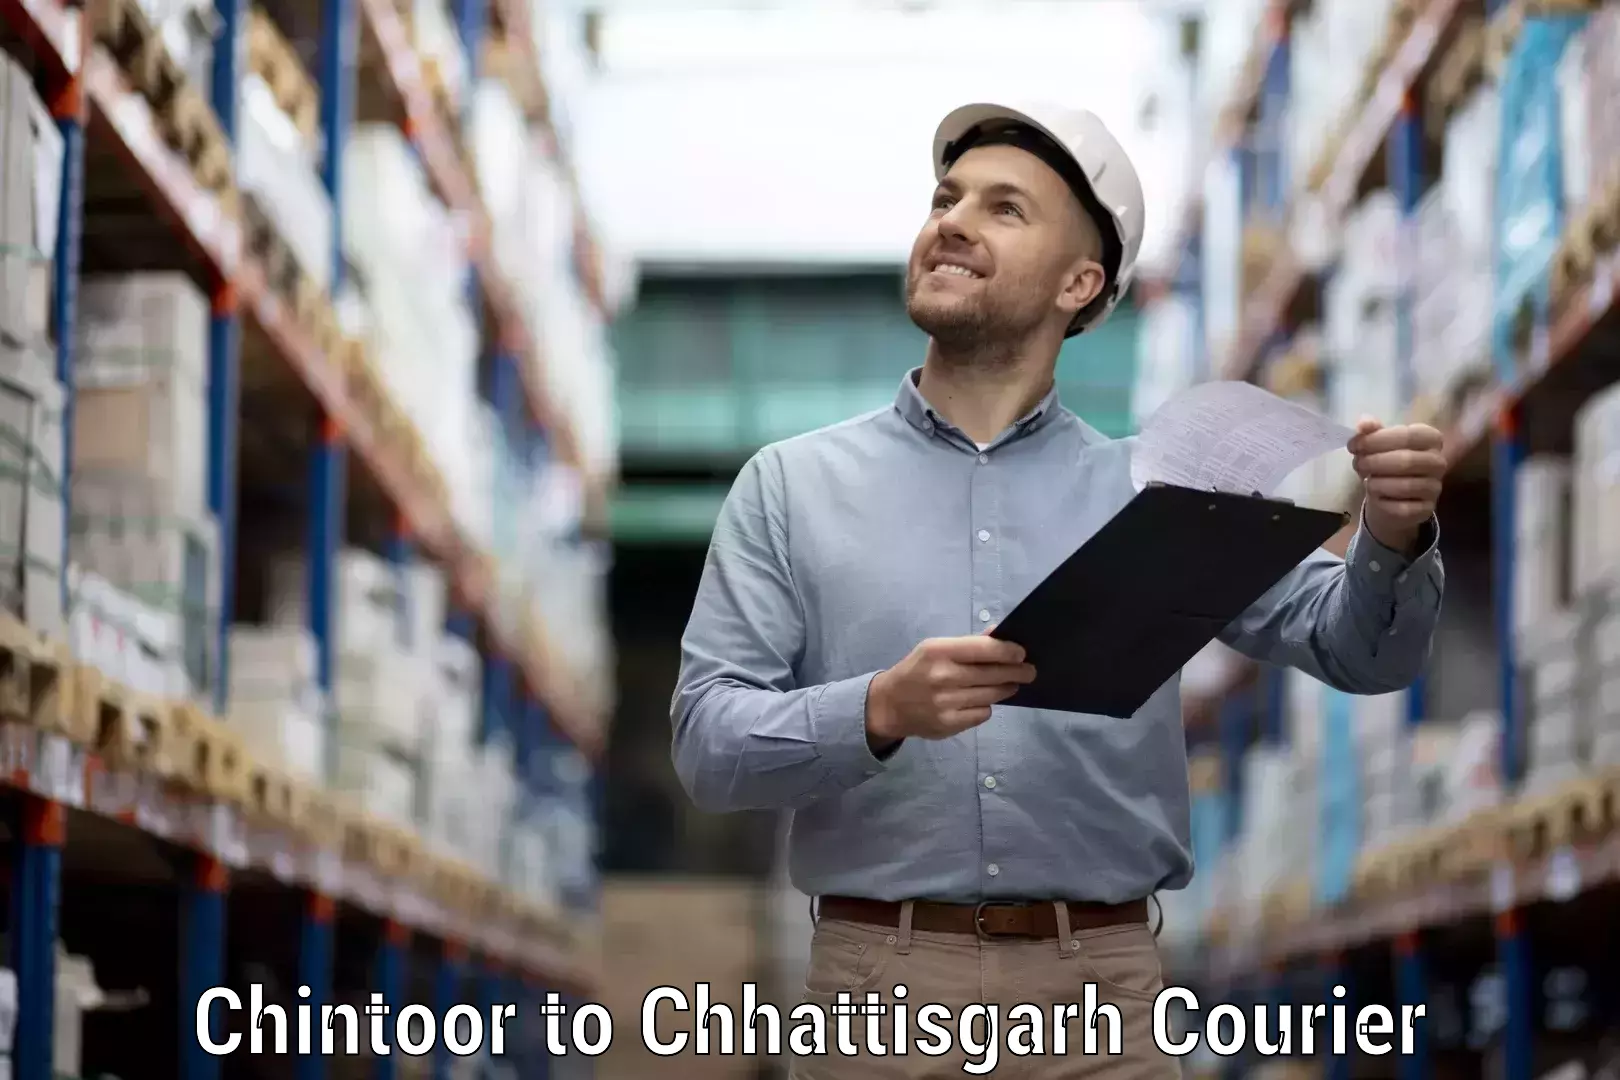 Customer-focused courier Chintoor to Bhatgaon